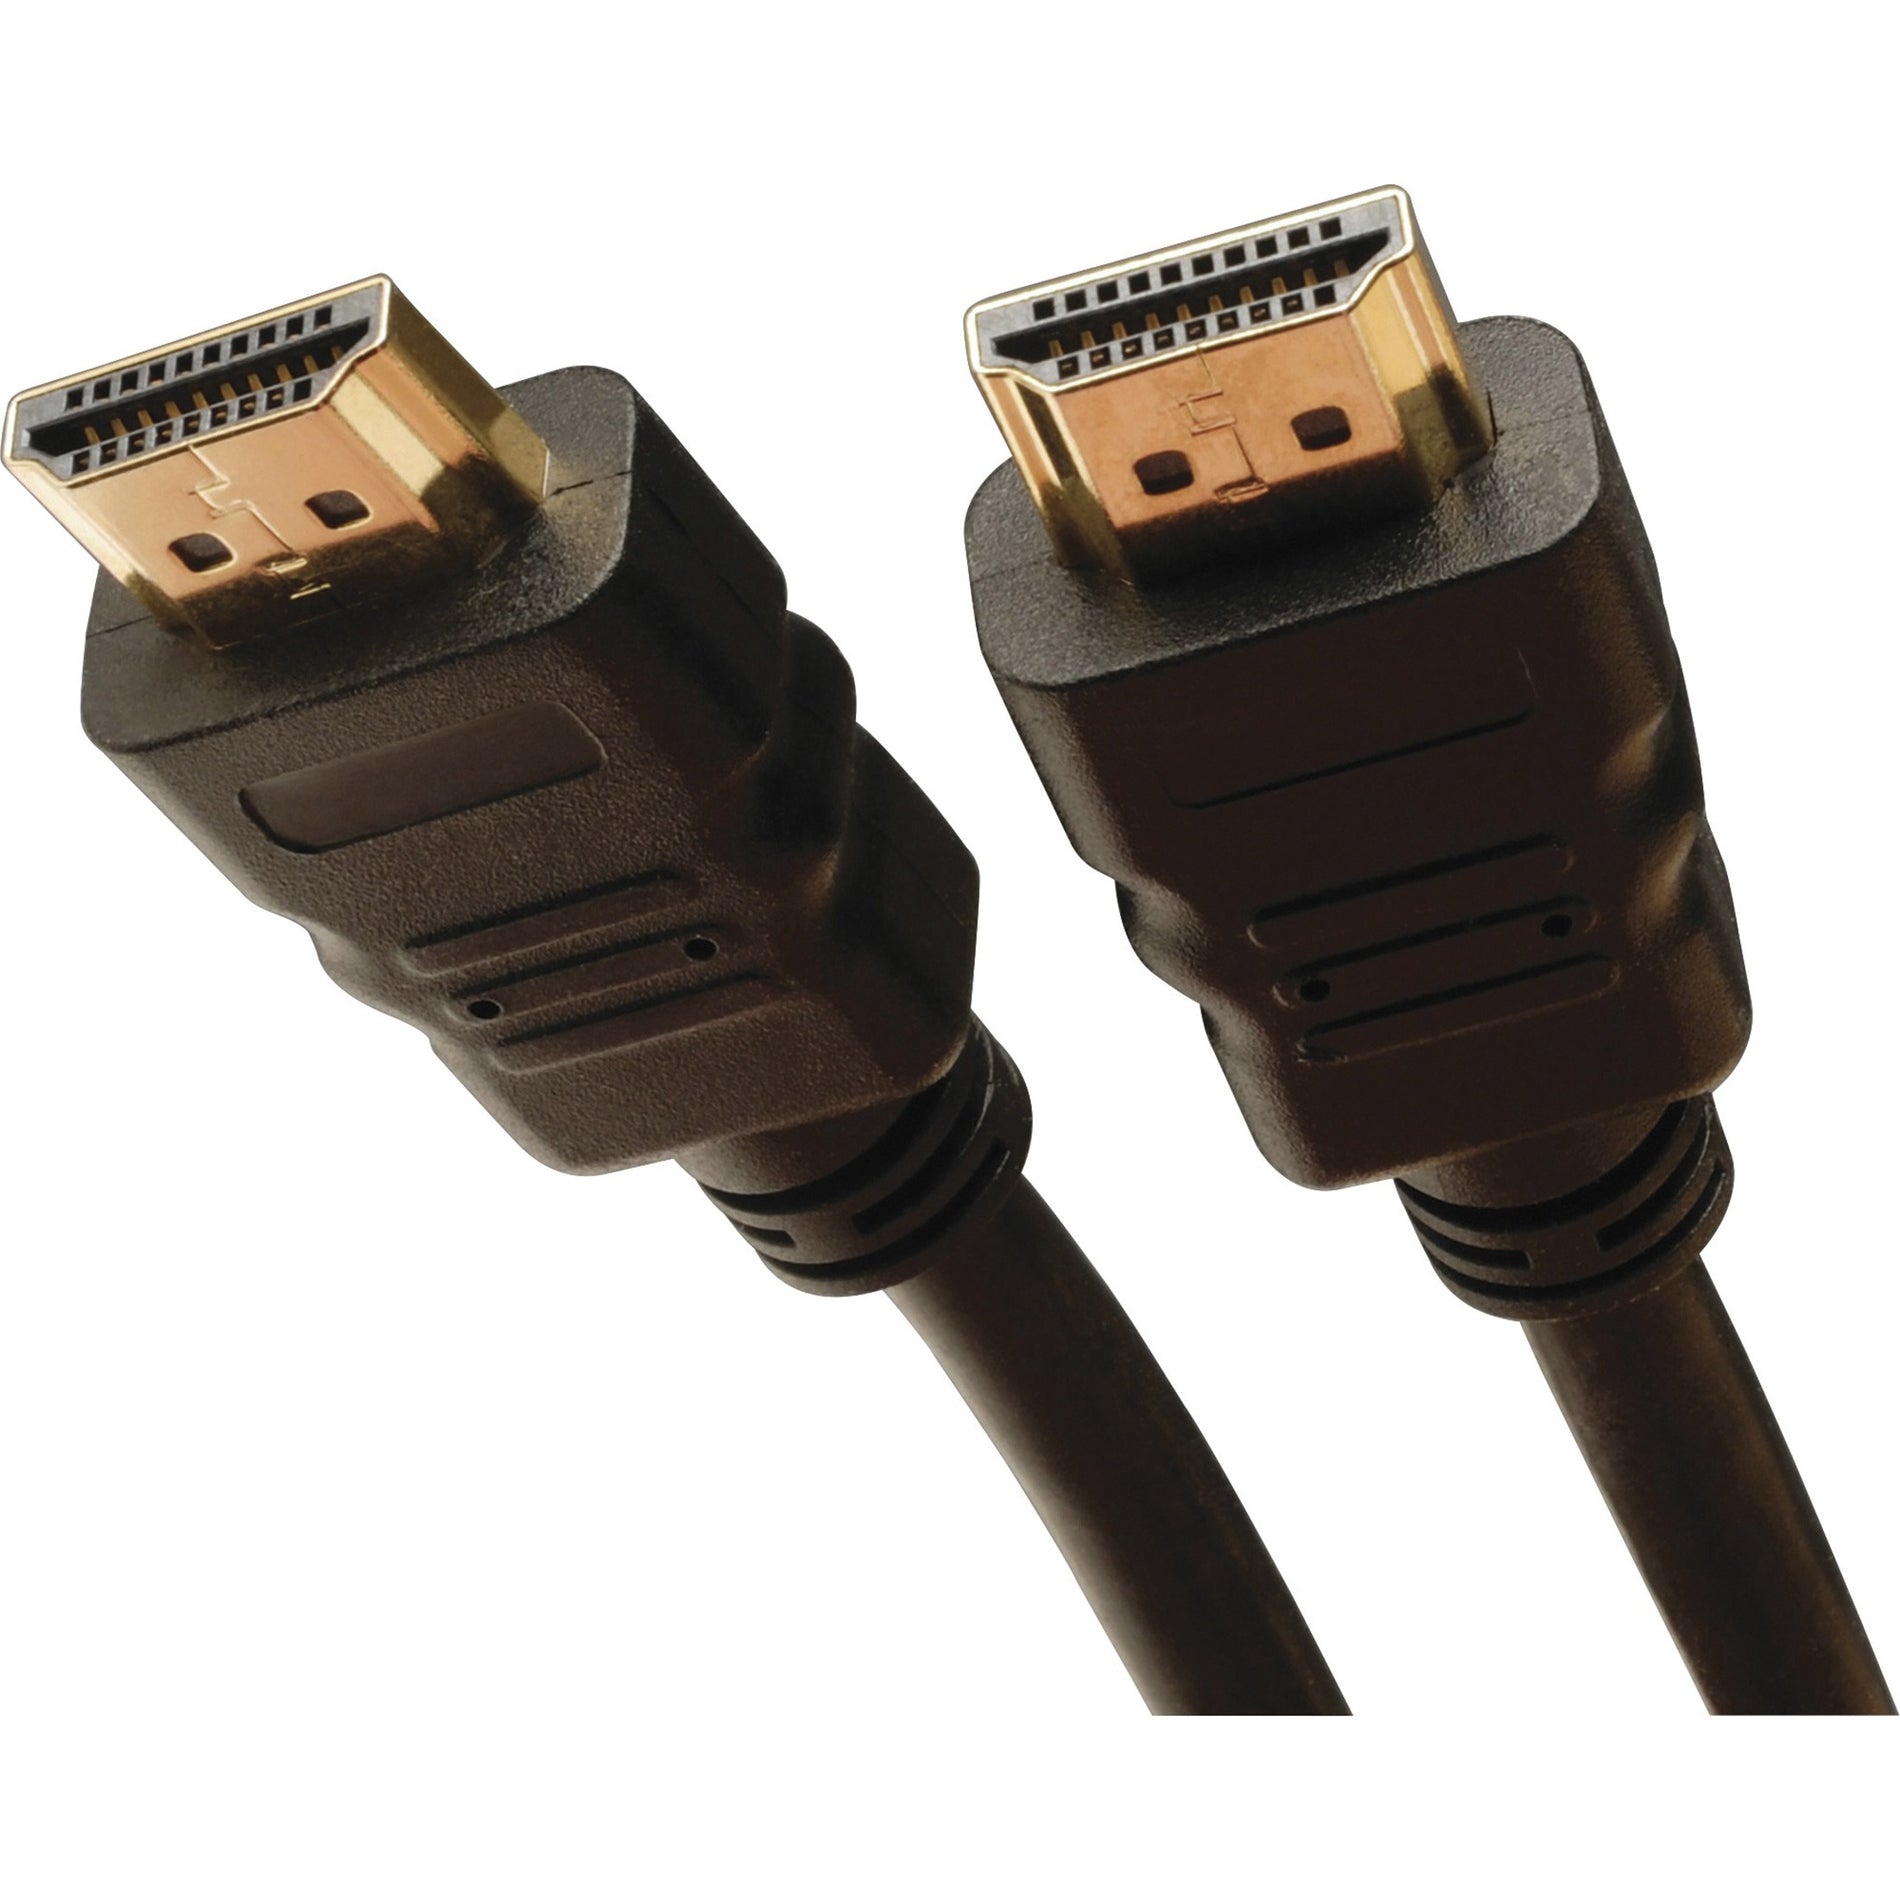 Tripp Lite P569-050 50-ft. (15.24 m) Standard Speed with Ethernet HDMI Cable, Bendable, Gold-Plated Connectors, 18 Gbit/s Data Transfer Rate